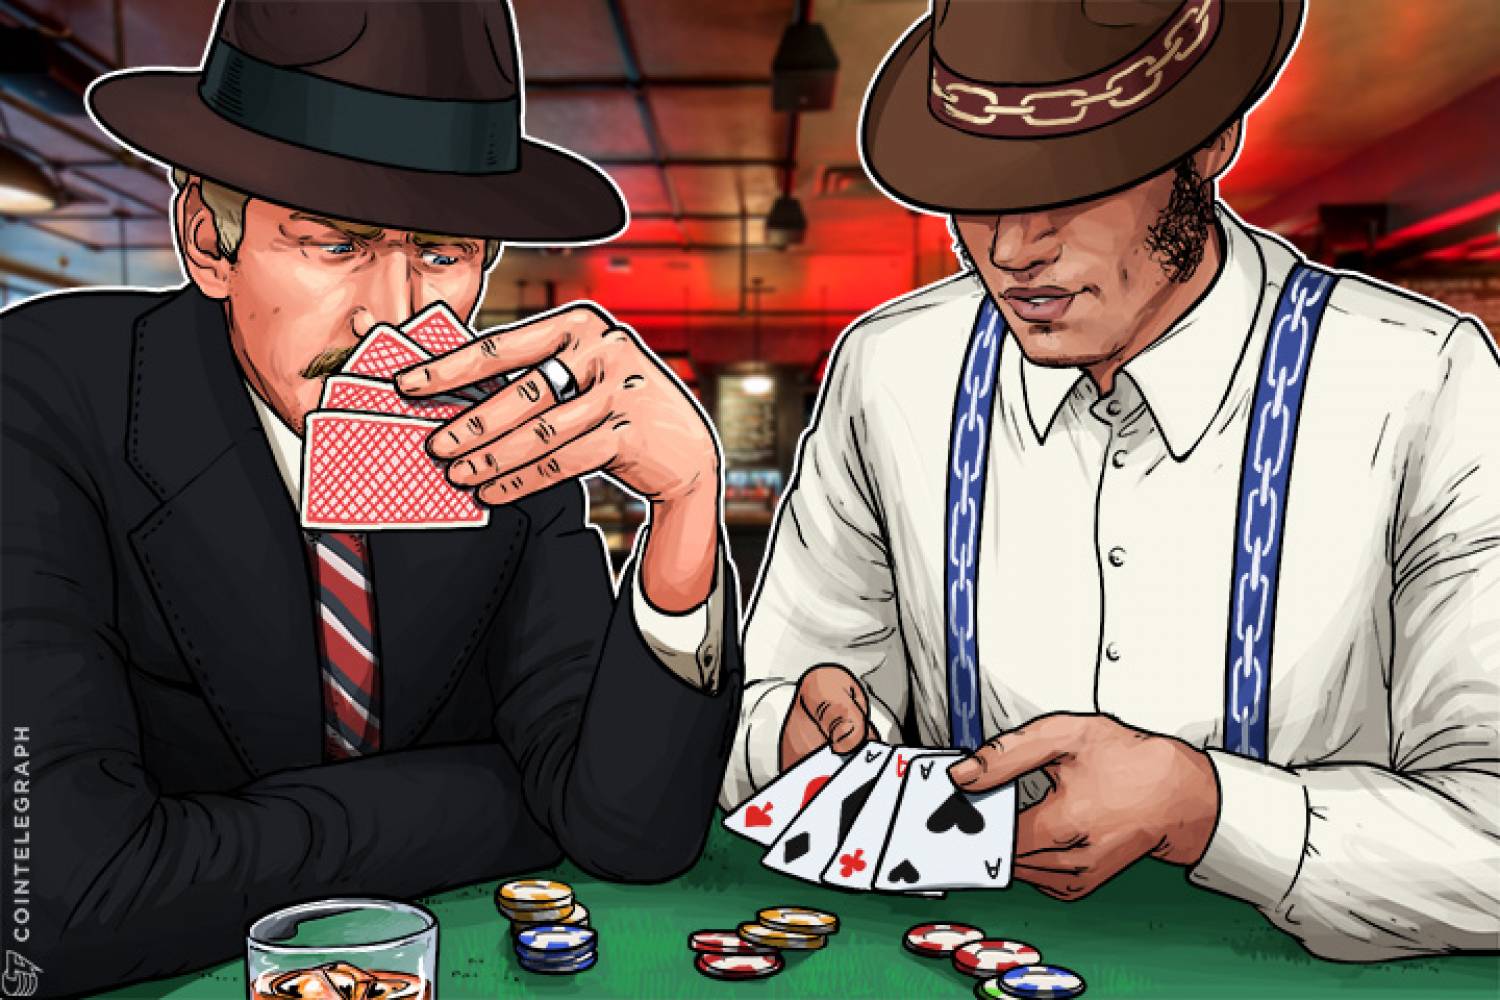 Is gambling a recommended form of investment?